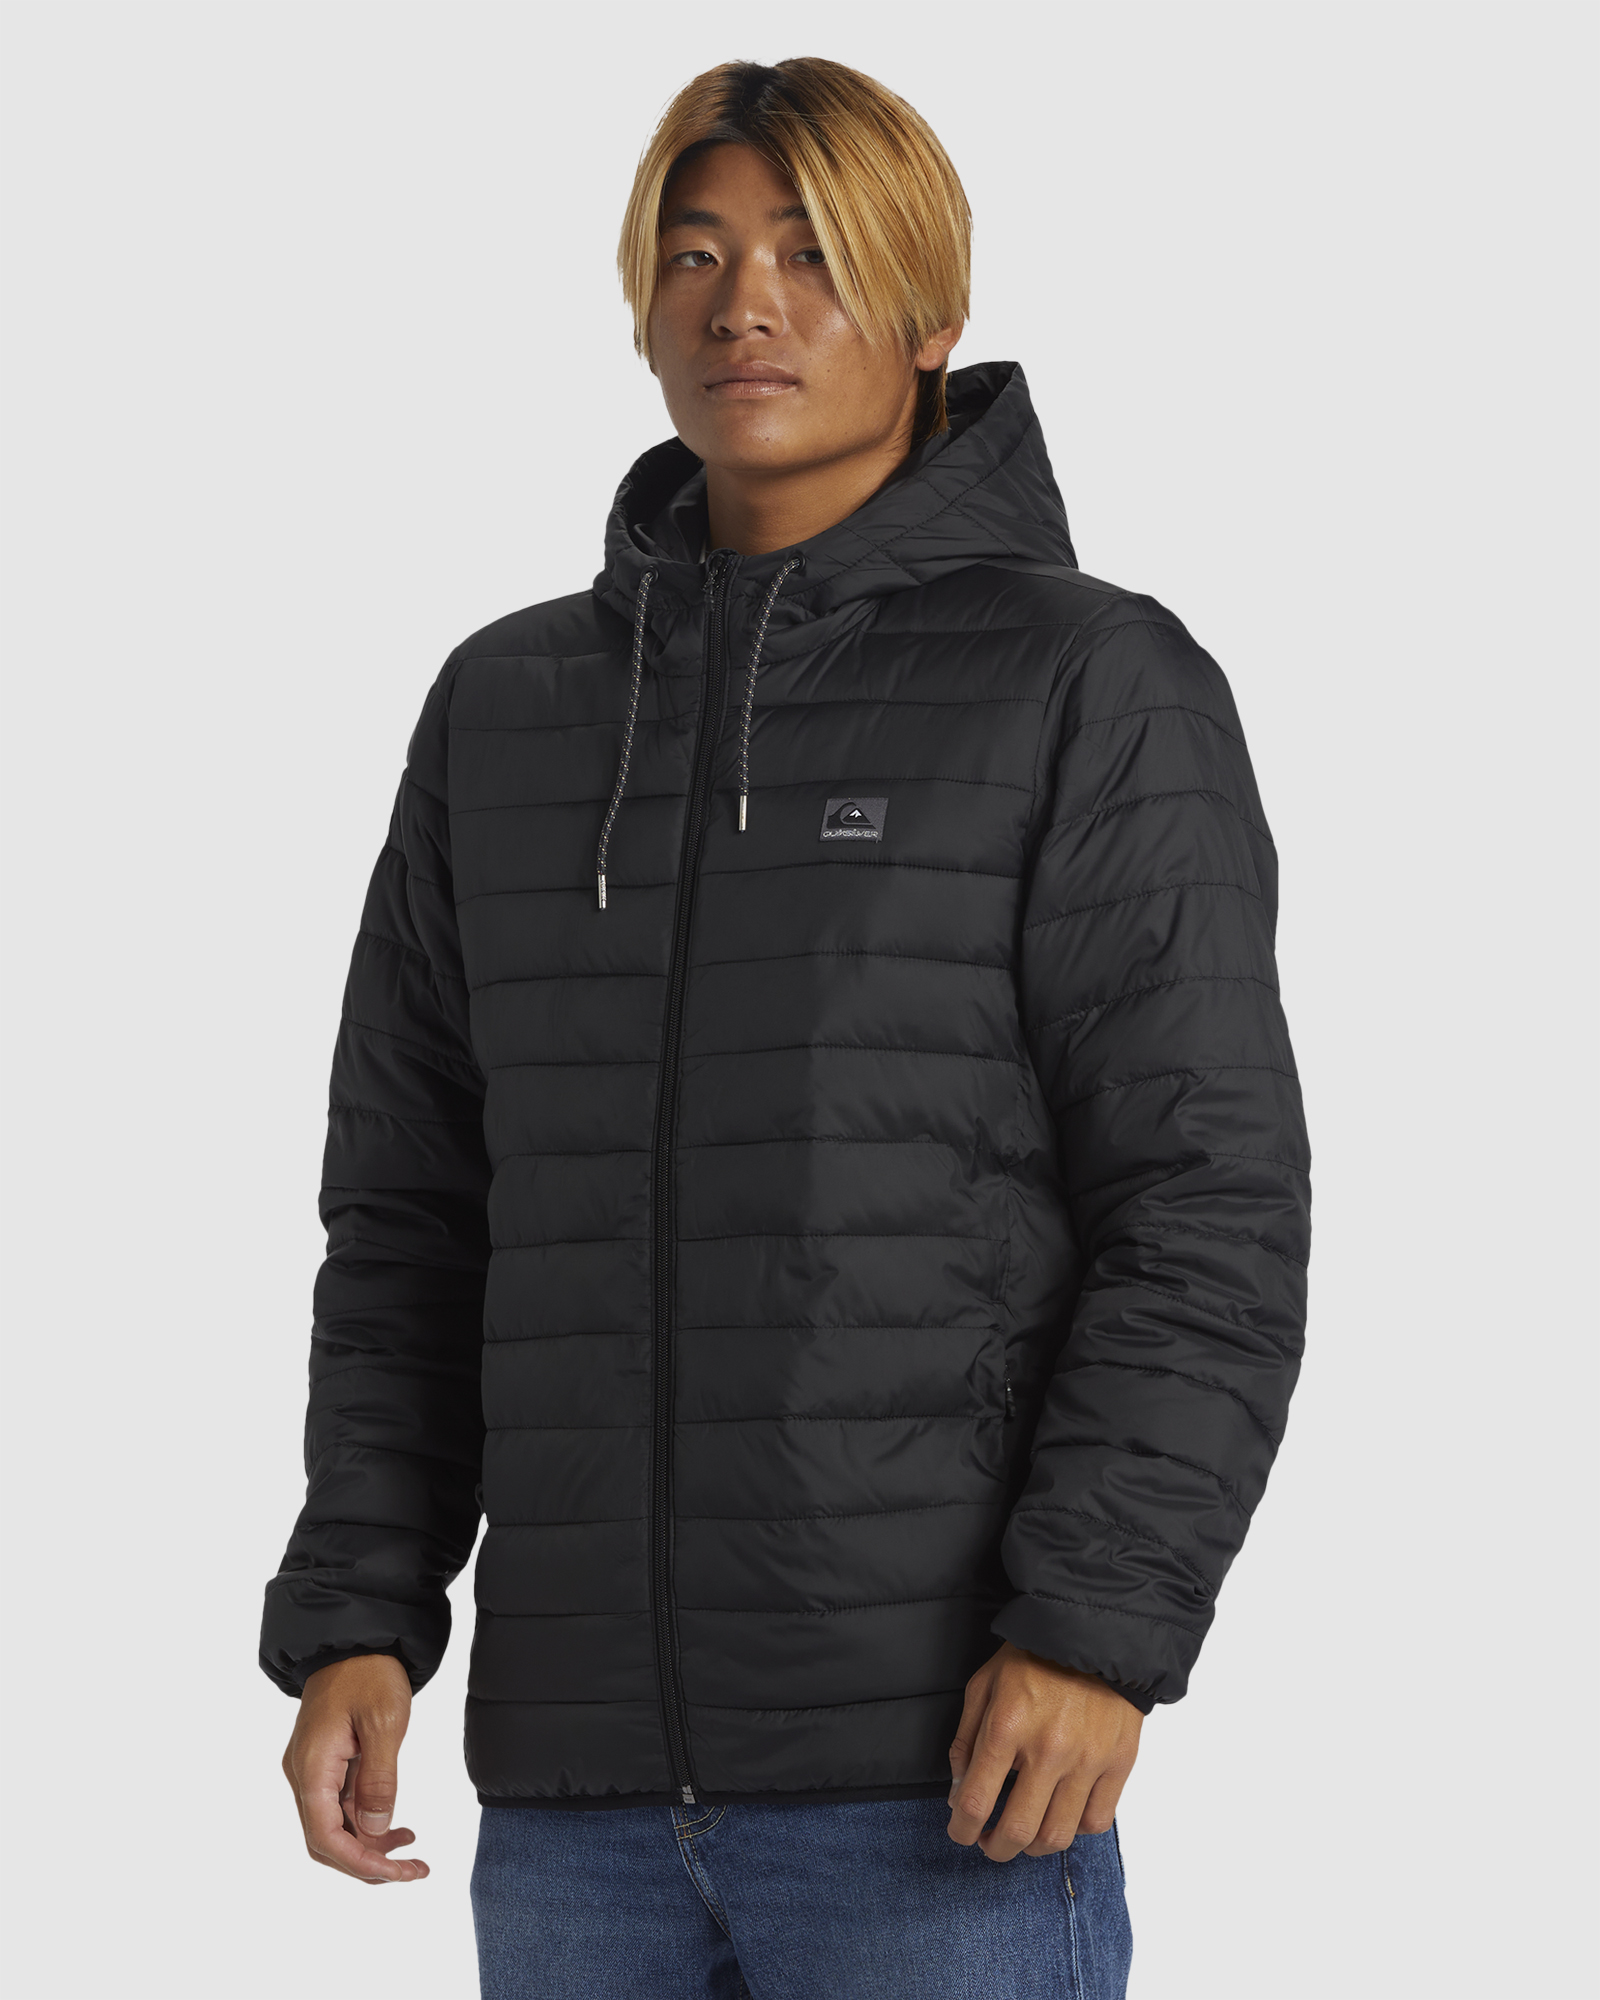 Quiksilver Mens Scaly Puffer Jacket - Black | SurfStitch